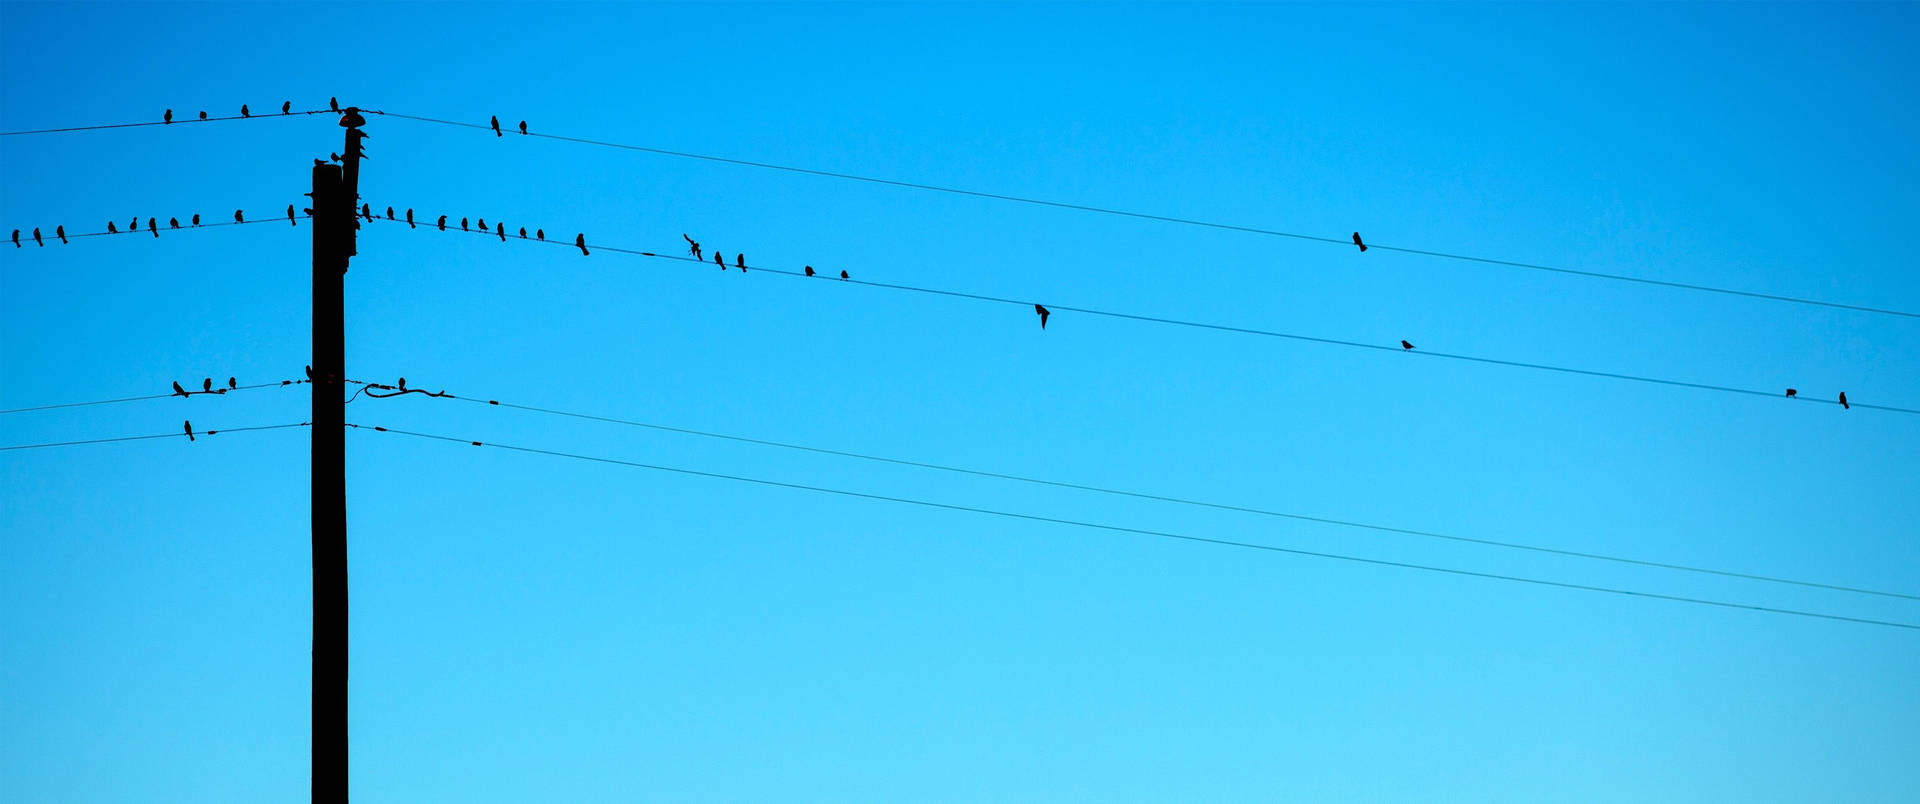 3440x1440 Minimalist Birds On Cables Background